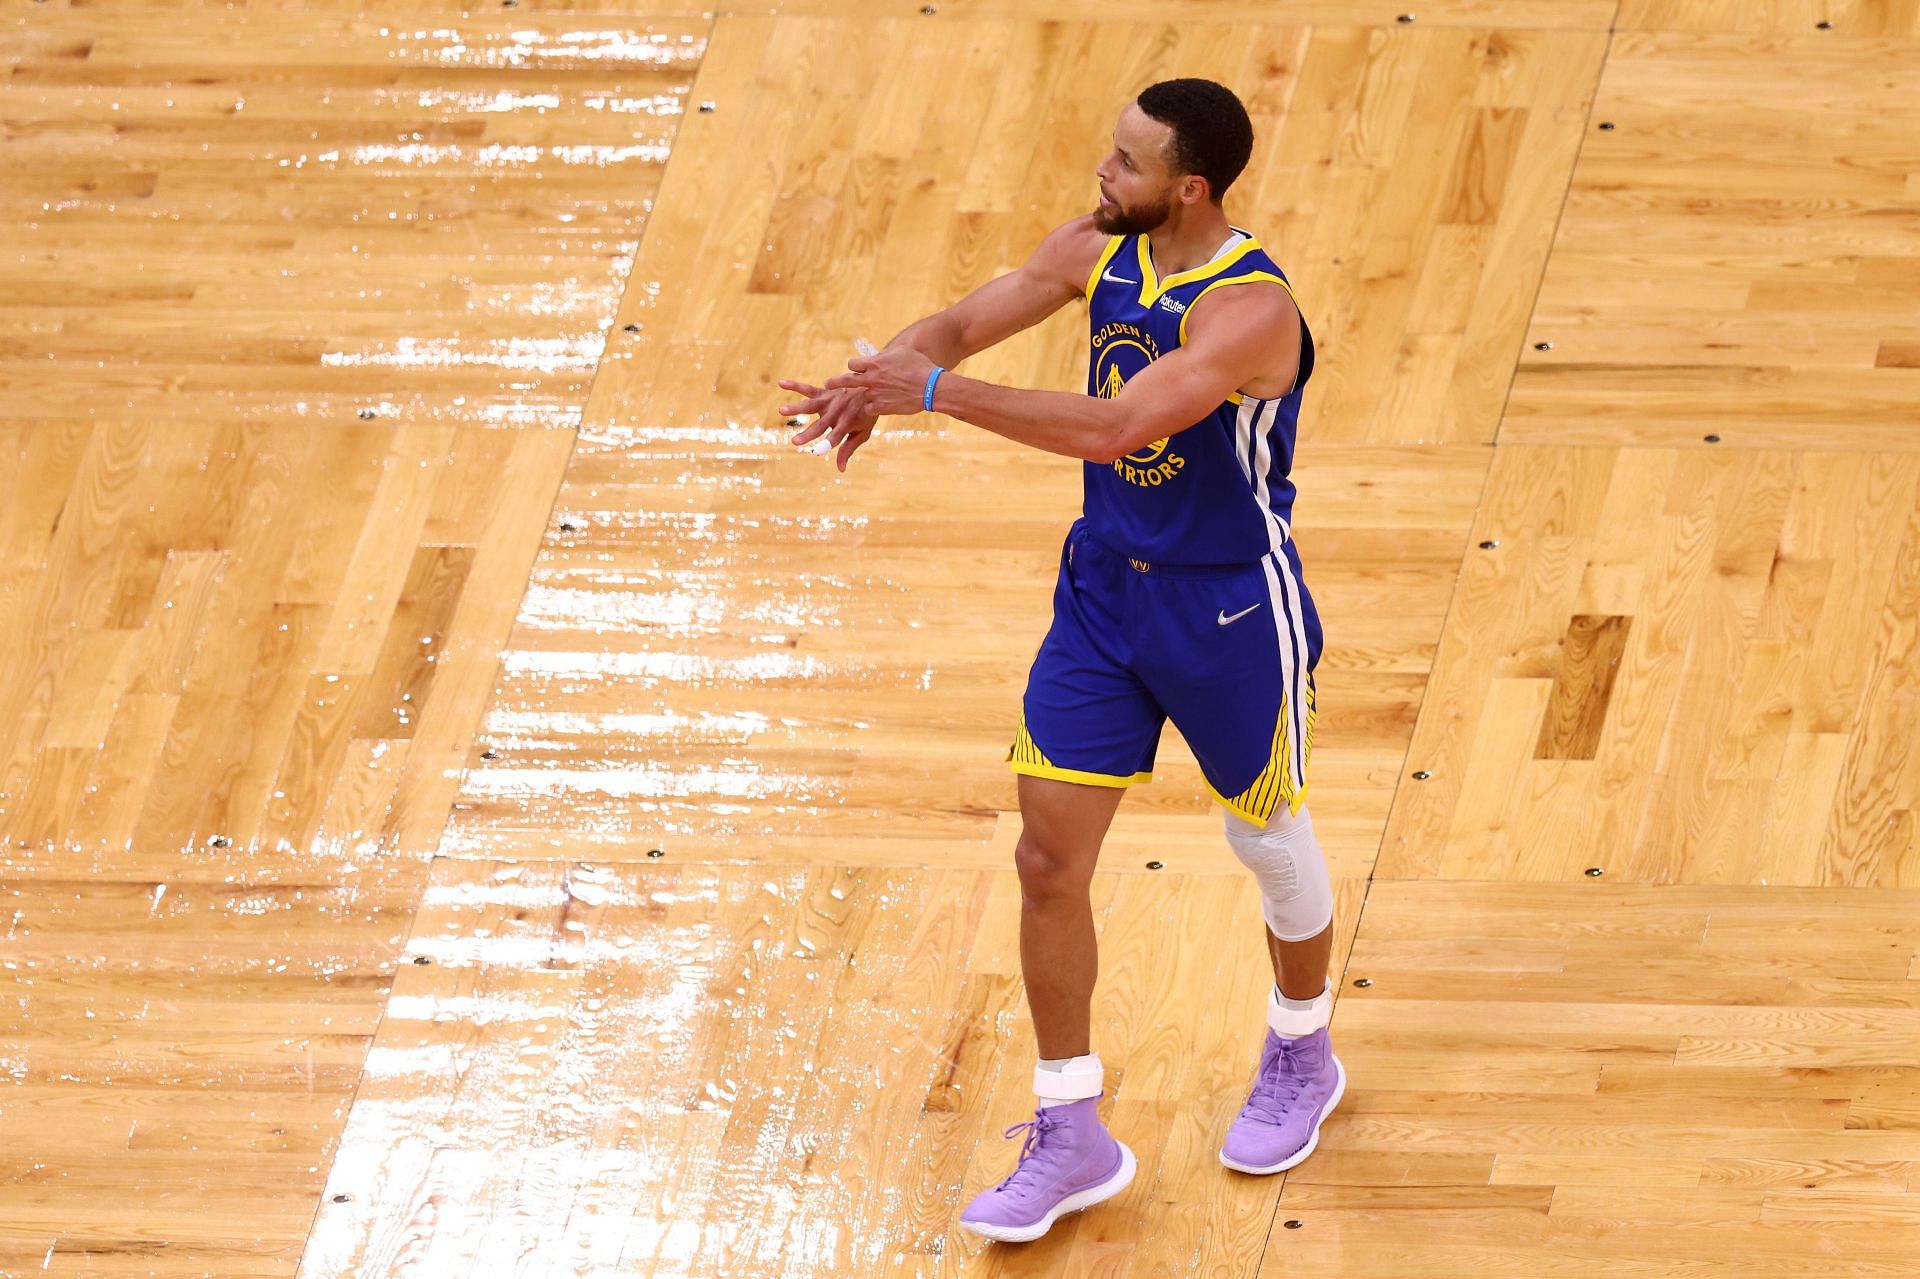 Steph Curry won his fourth NBA title with a game-high 34 points.